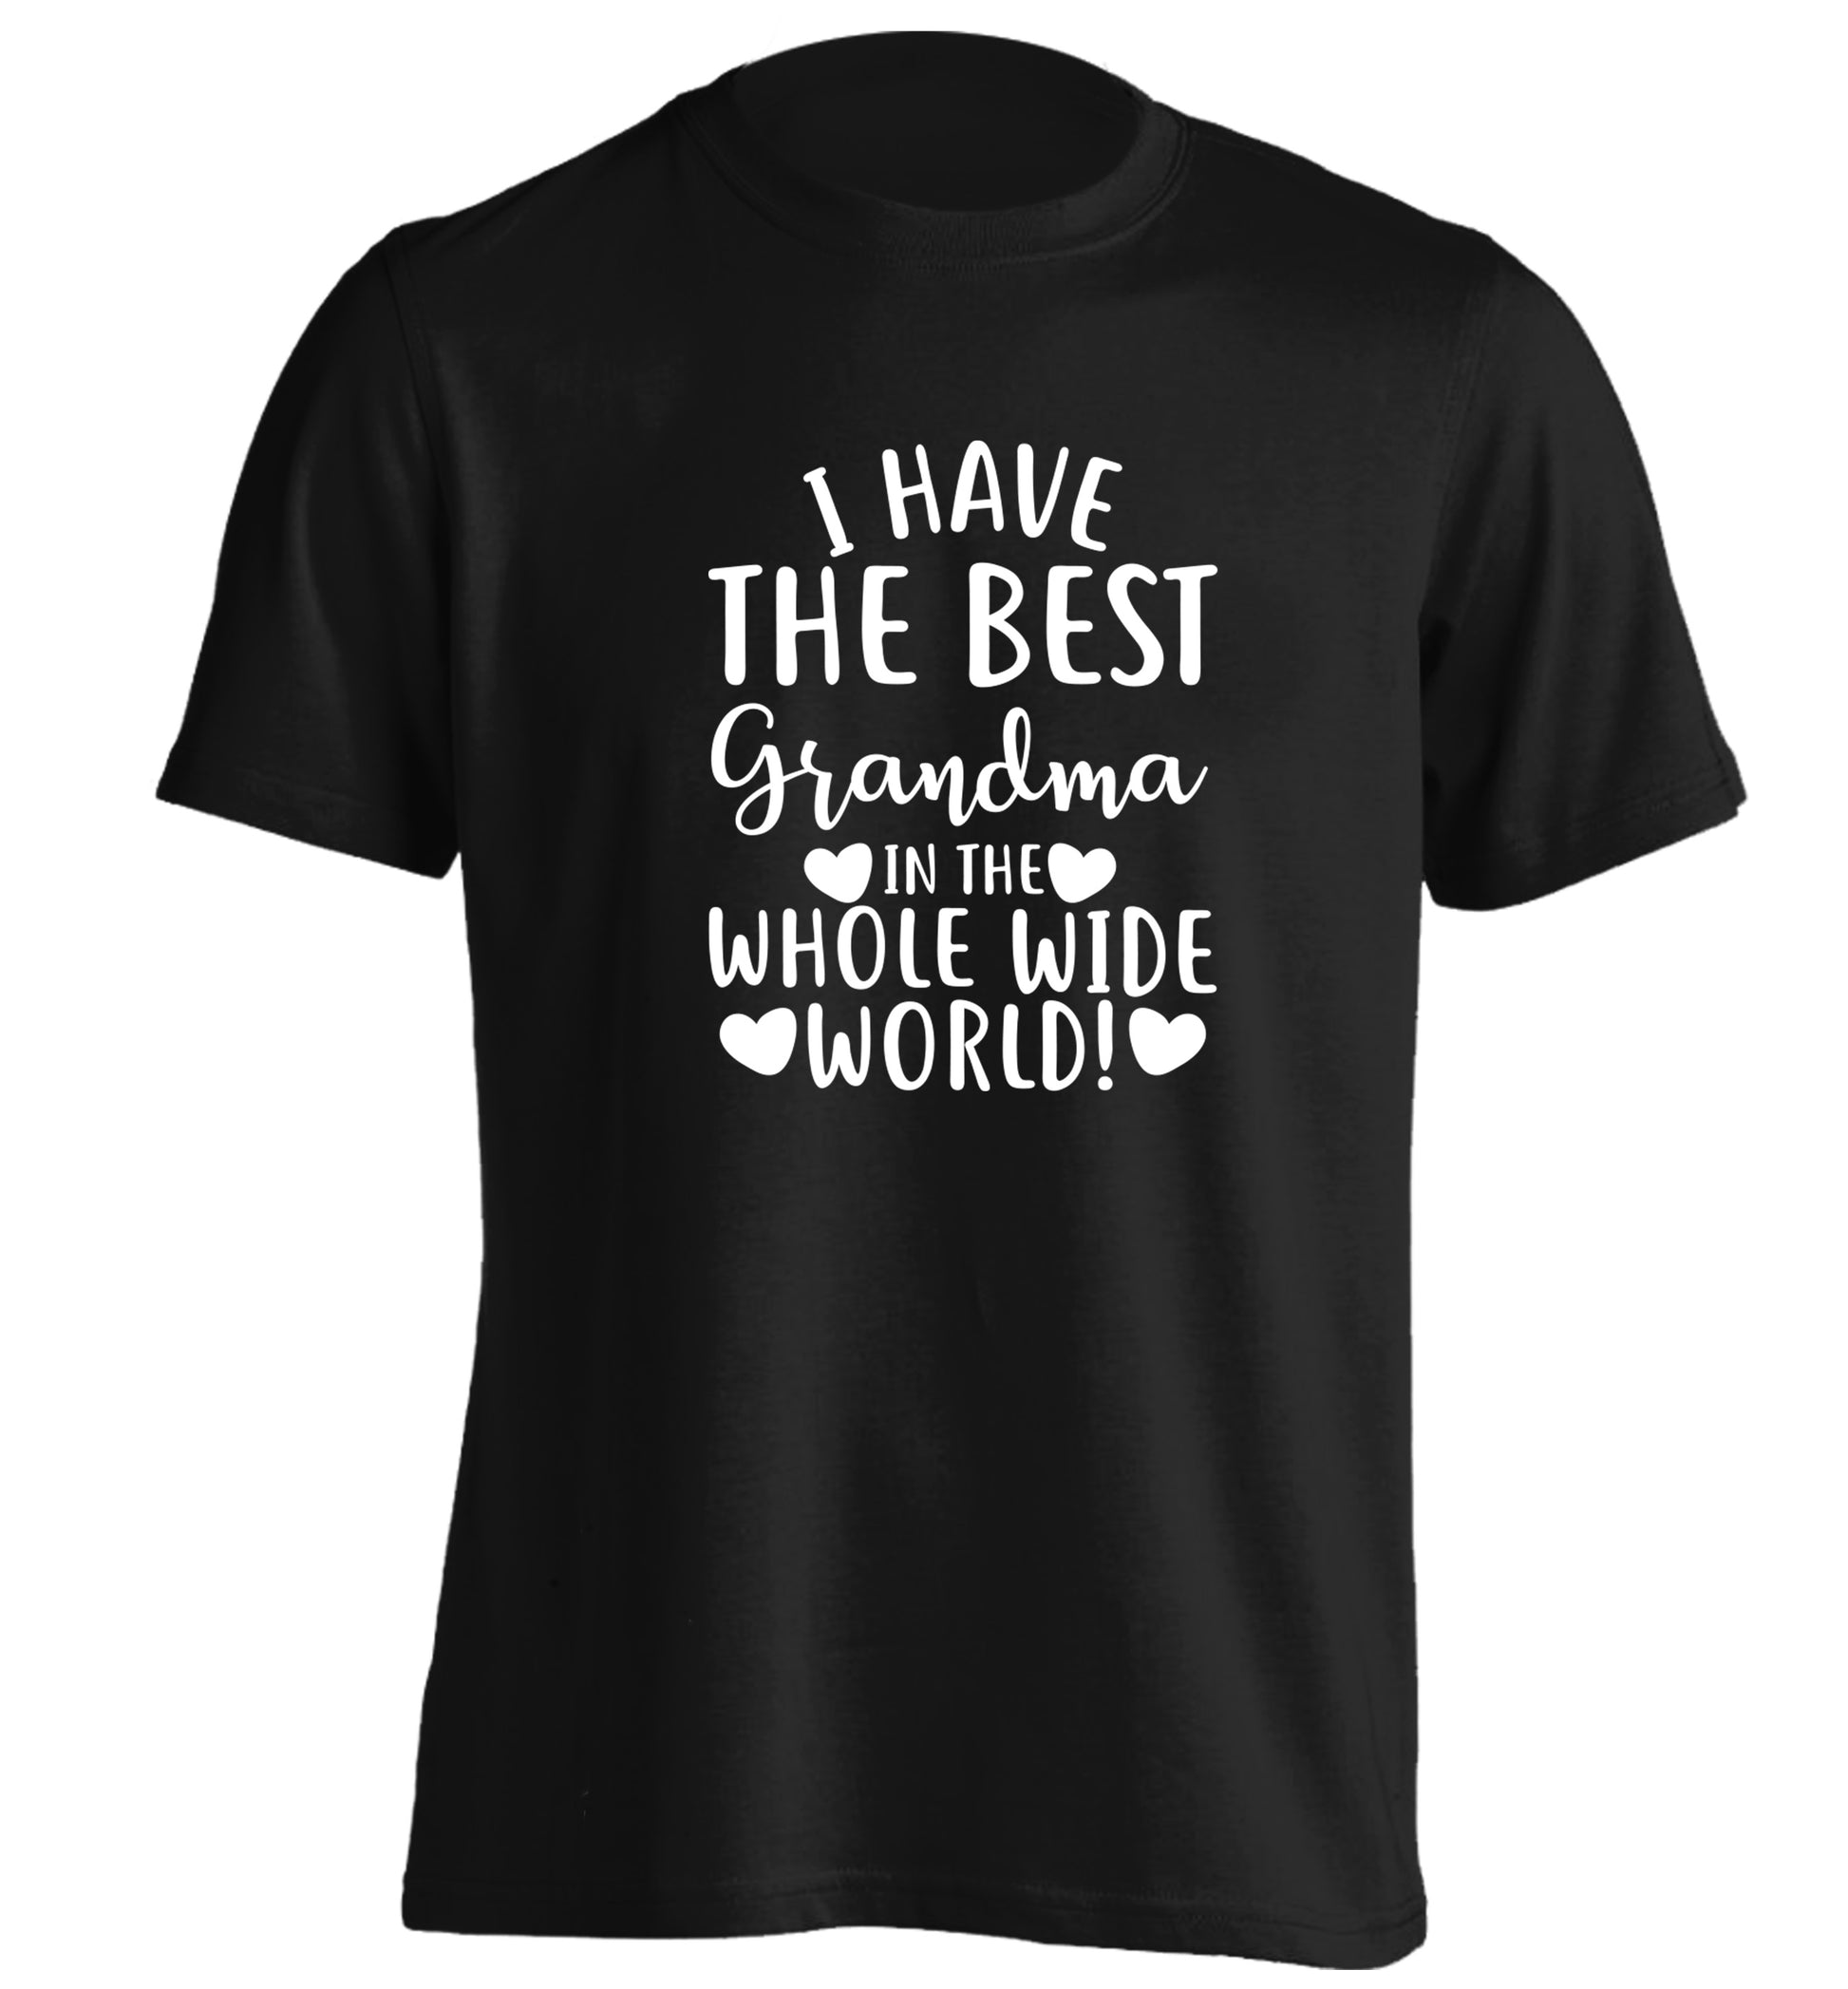 I have the best grandma in the whole wide world! adults unisex black Tshirt 2XL